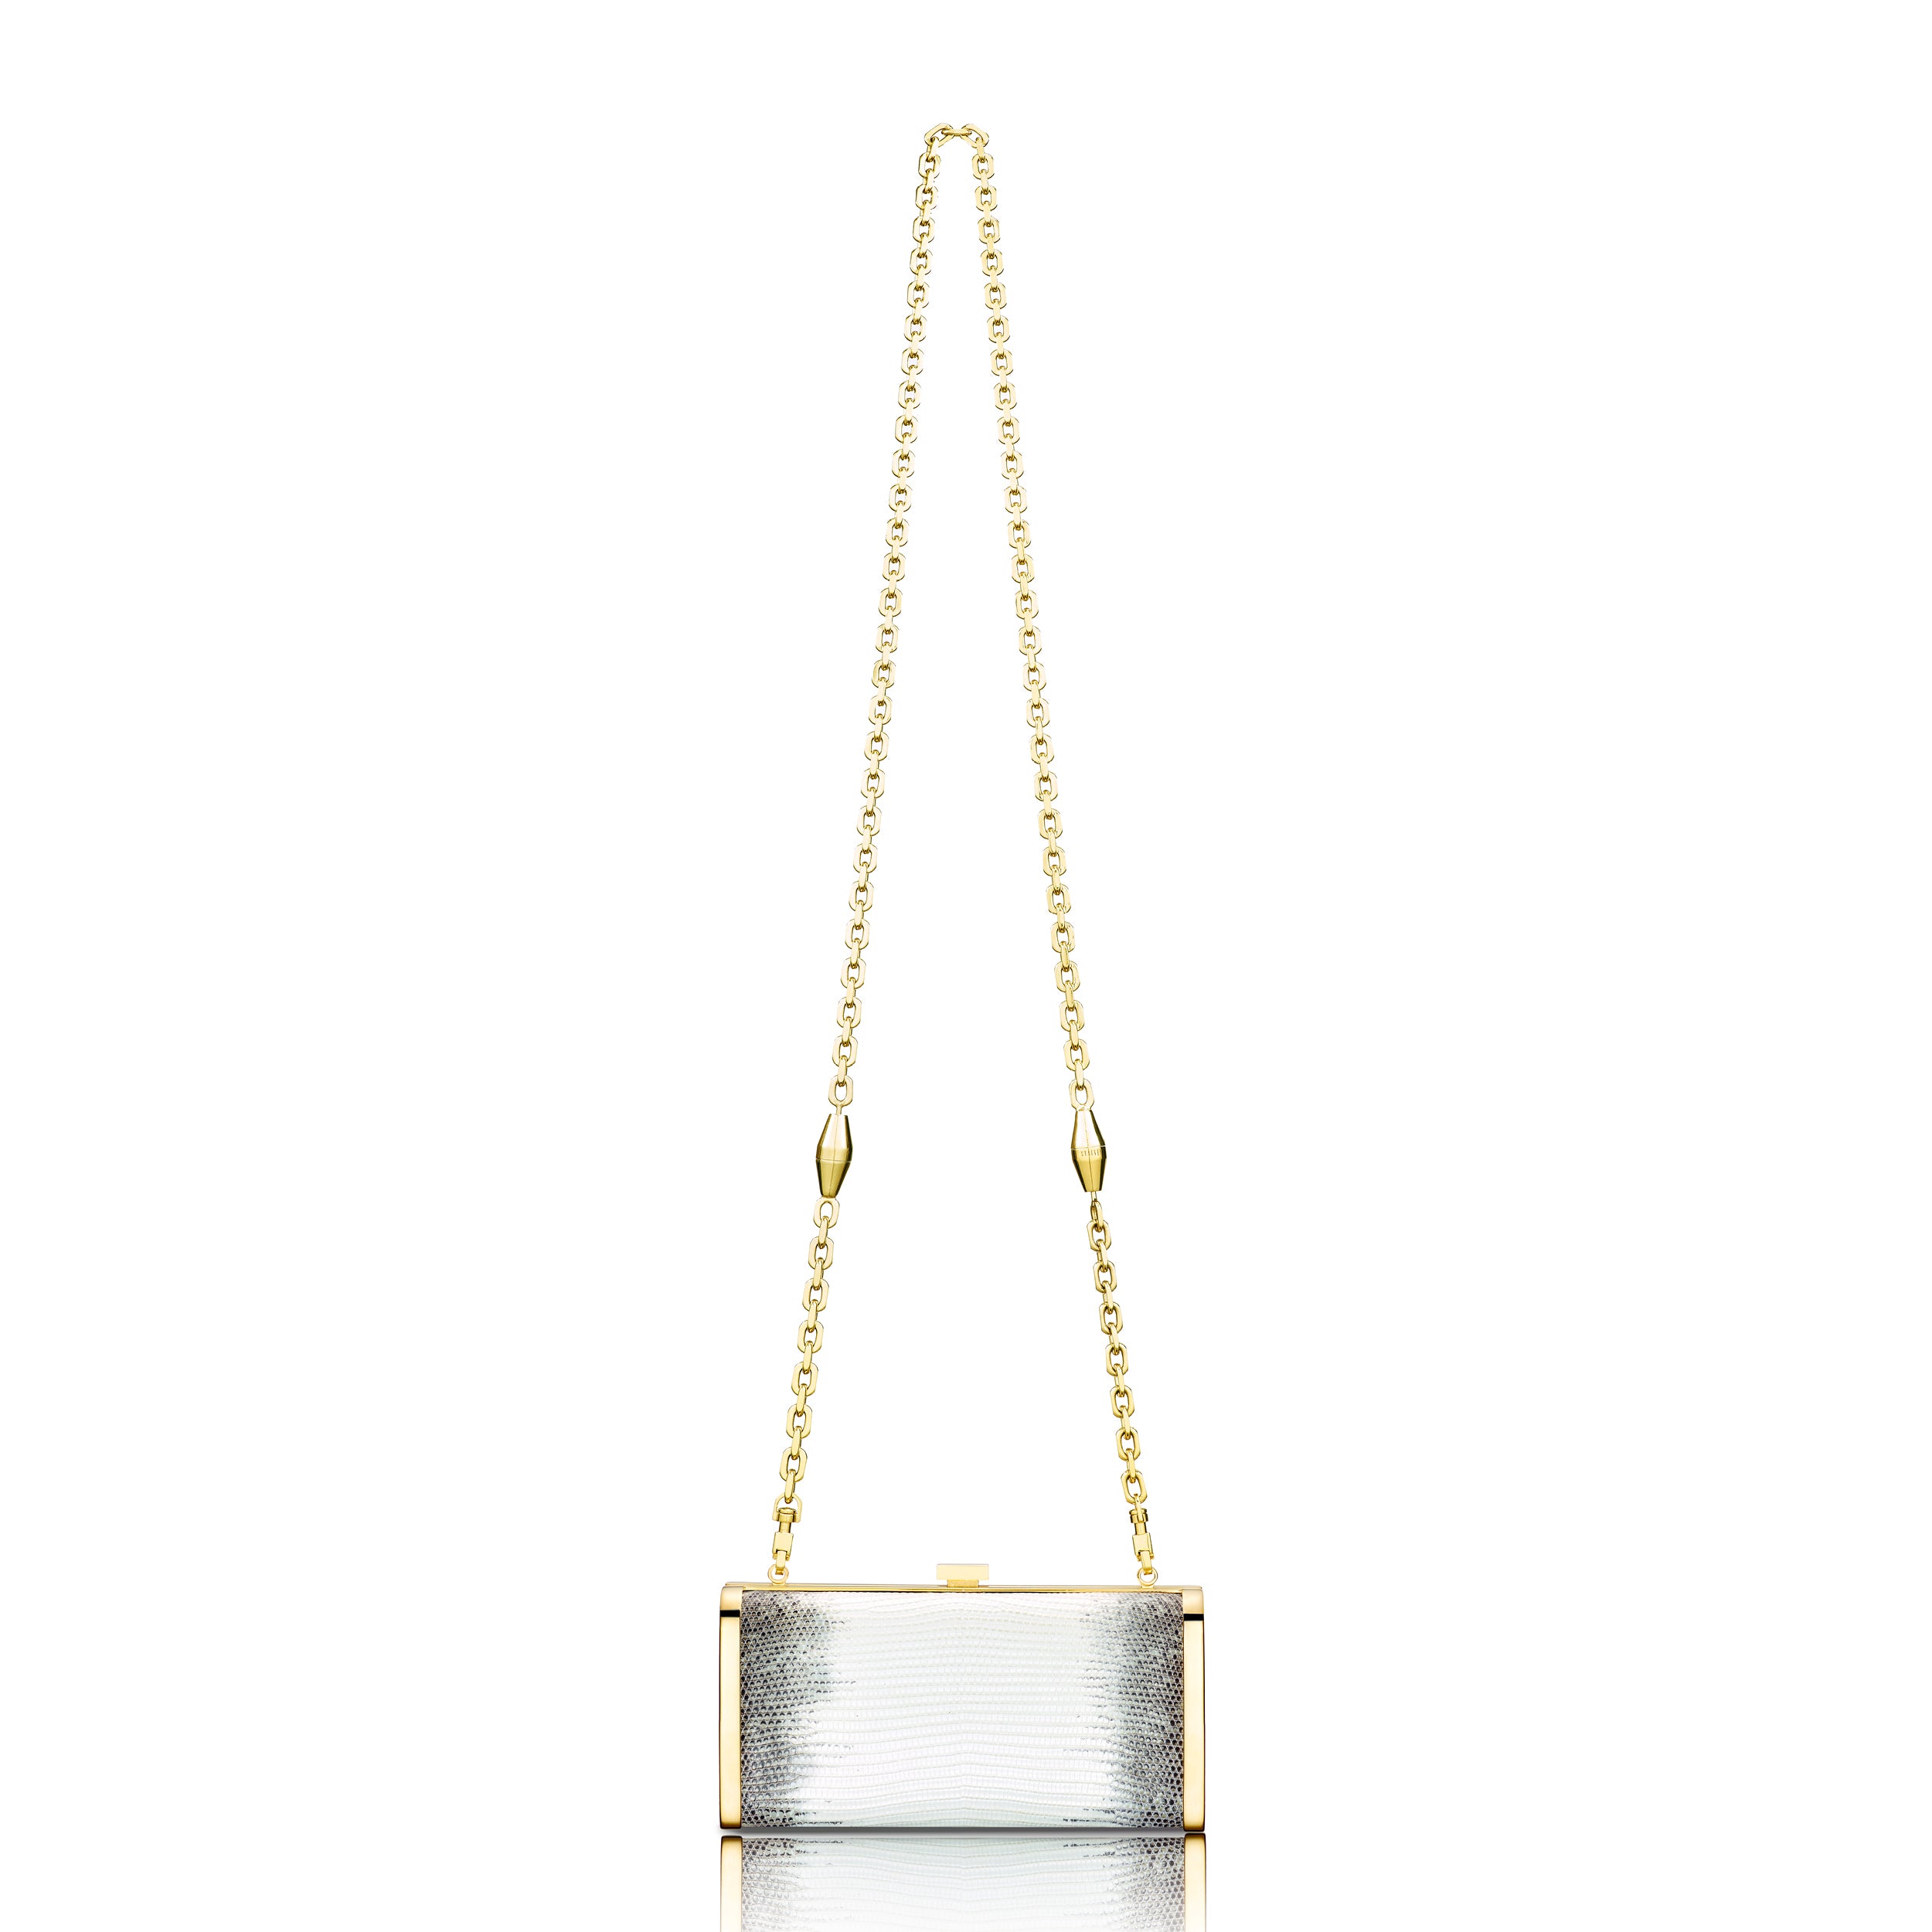 STALVEY Square Clutch in Natural Ring Lizard with 24kt Gold Hardware Front View with Chain